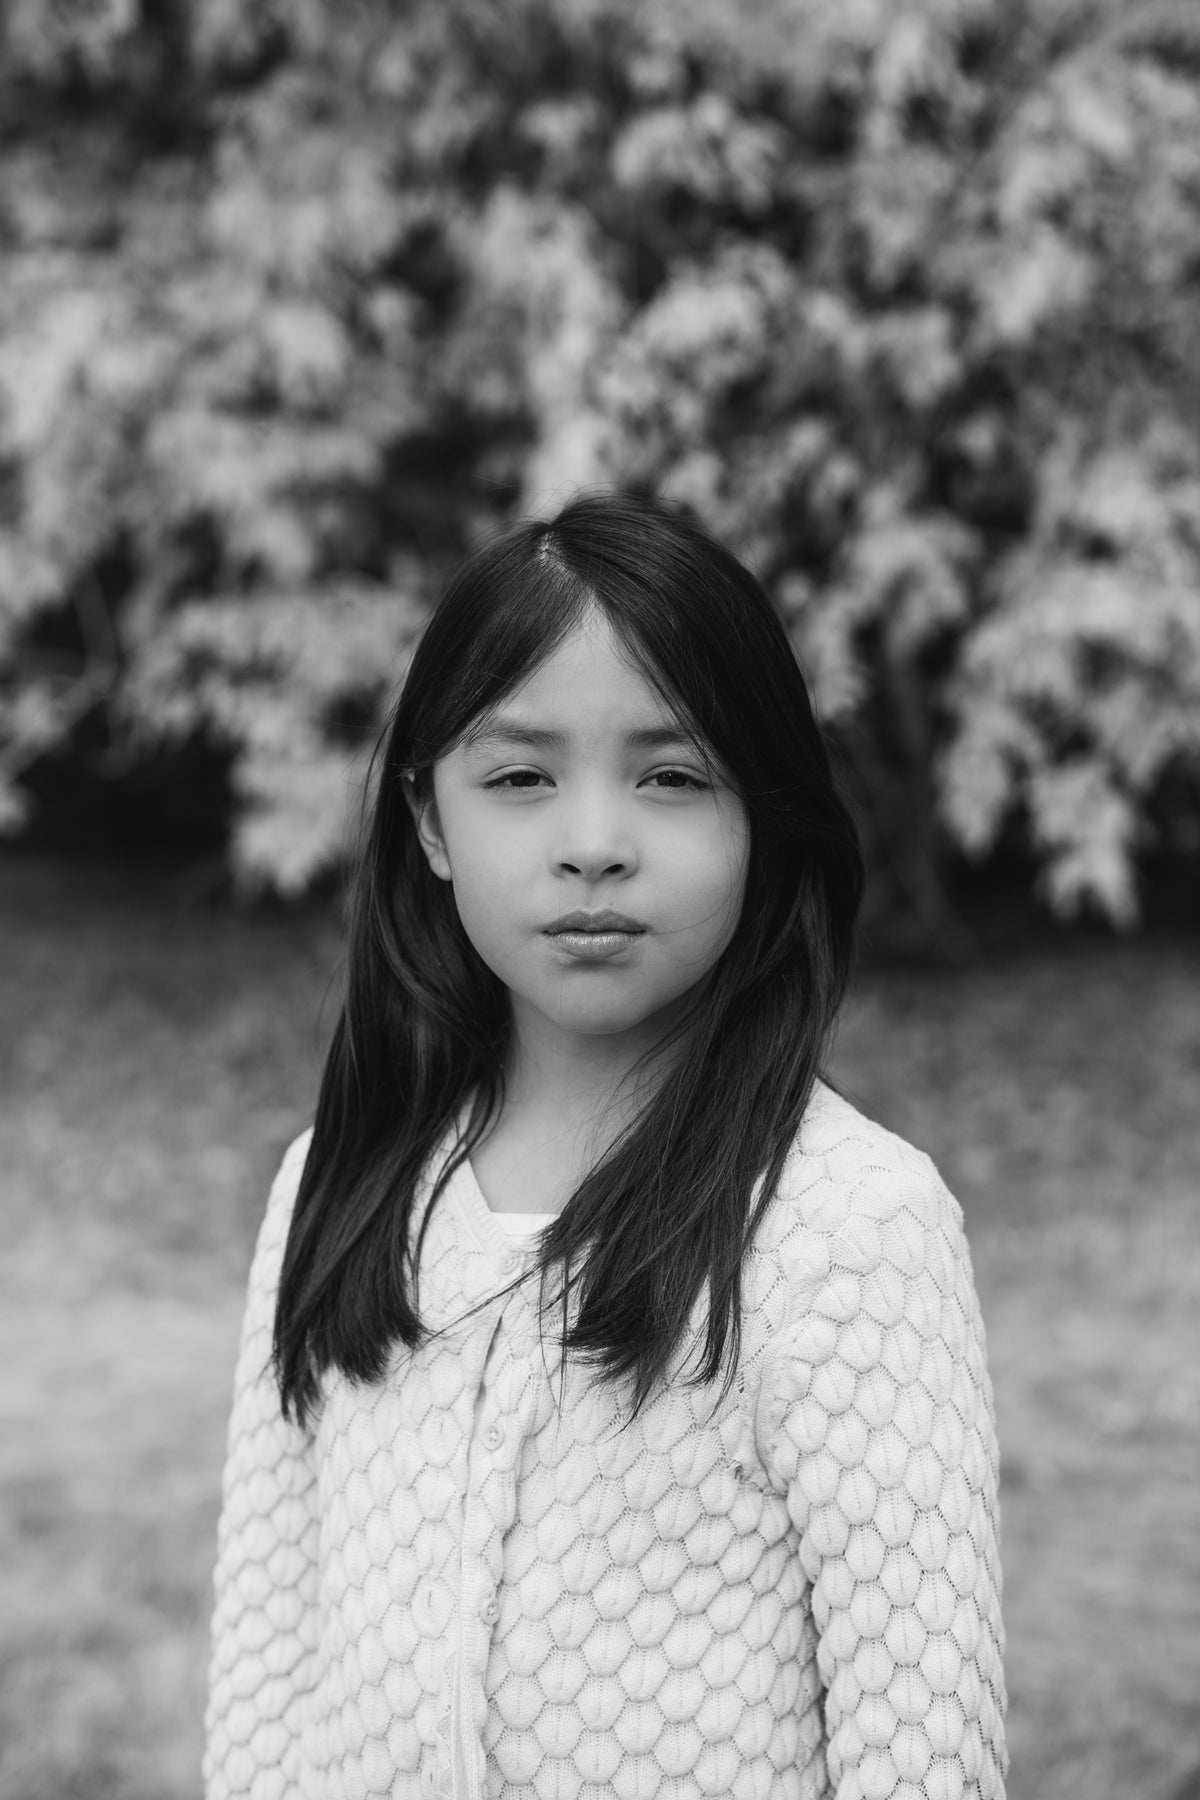 moody portrait of a child in black and white